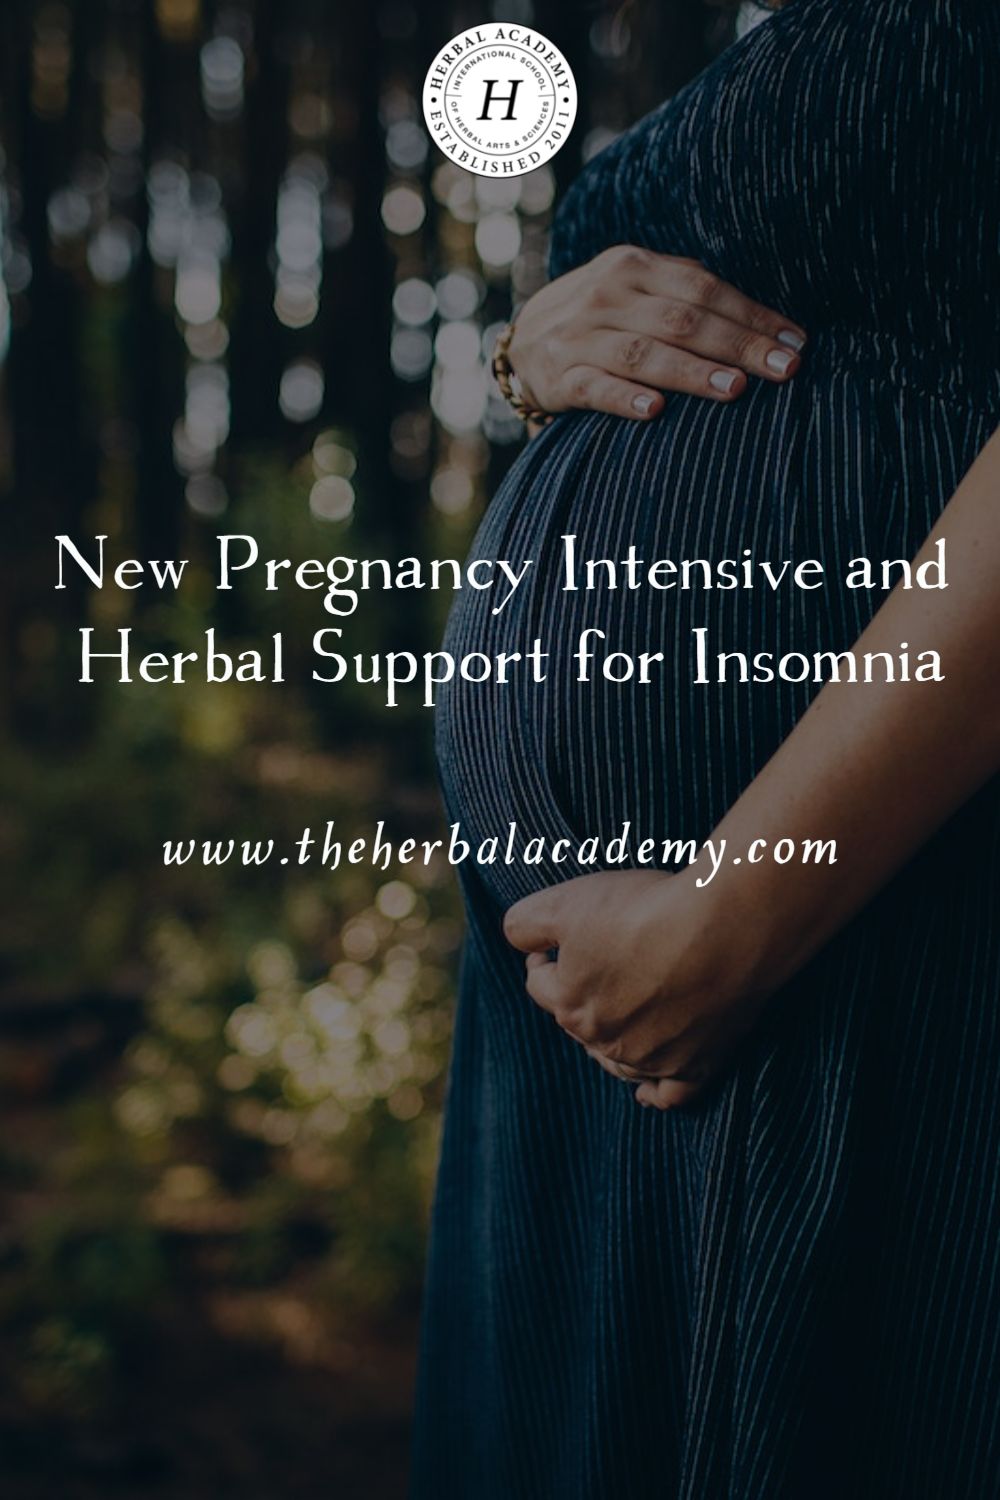 New Pregnancy Intensive and Herbal Support for Insomnia | Herbal Academy | In addition to herbal support, there are many self-care strategies that may help to ease stress, anxiety, and insomnia during pregnancy.